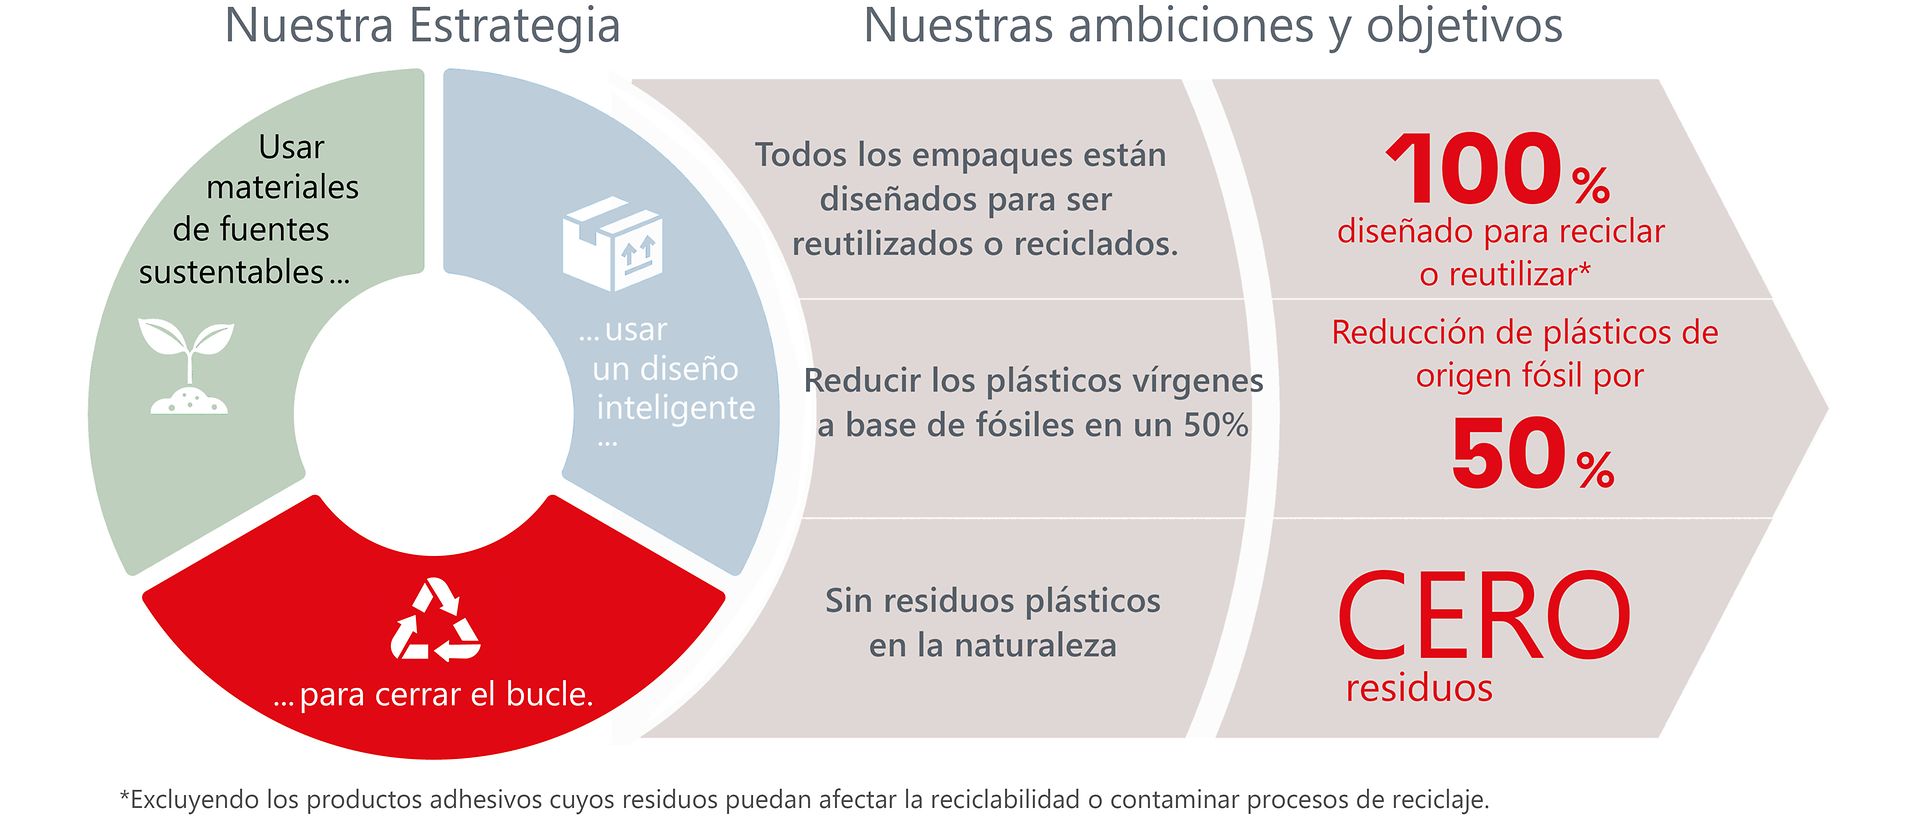 sustainability-packaging-strategy-estrategia-embalaje-sostenible-es